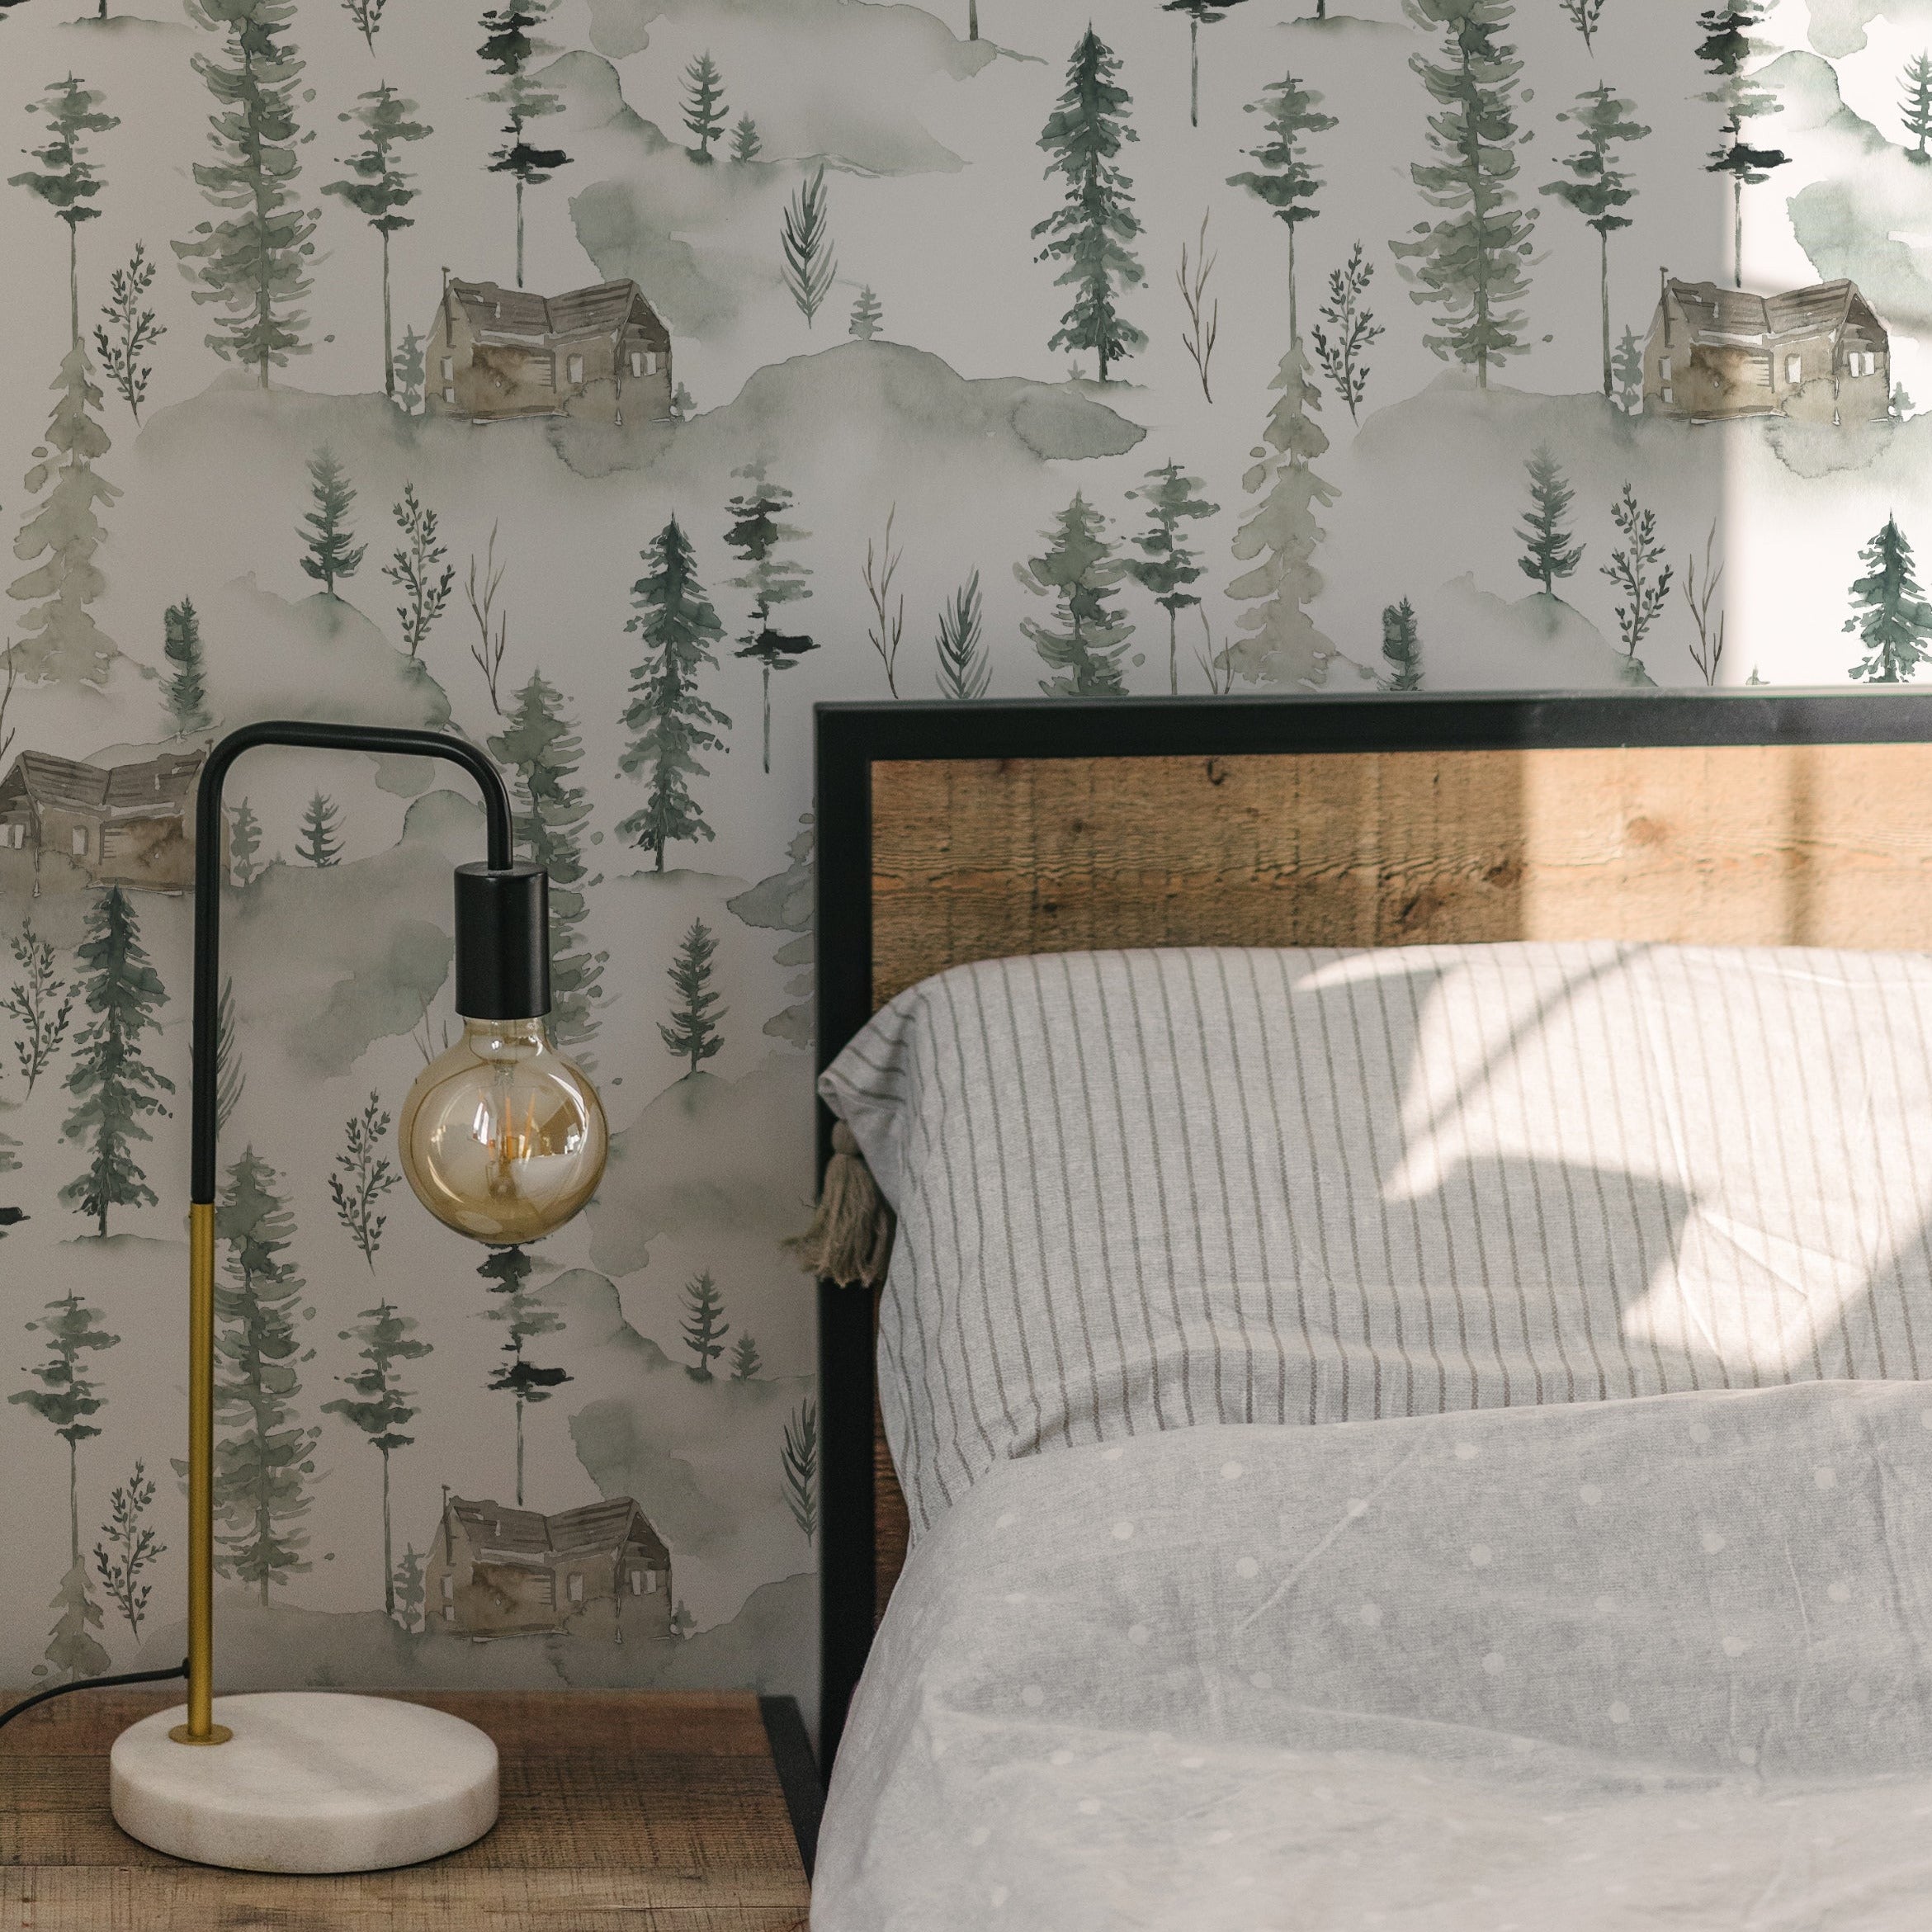 Bedroom interior showcasing In the Woods Wallpaper, creating a peaceful backdrop with its delicate forest and cabin motifs. The room includes a simple bed with striped bedding and a stylish bedside lamp, complementing the natural theme